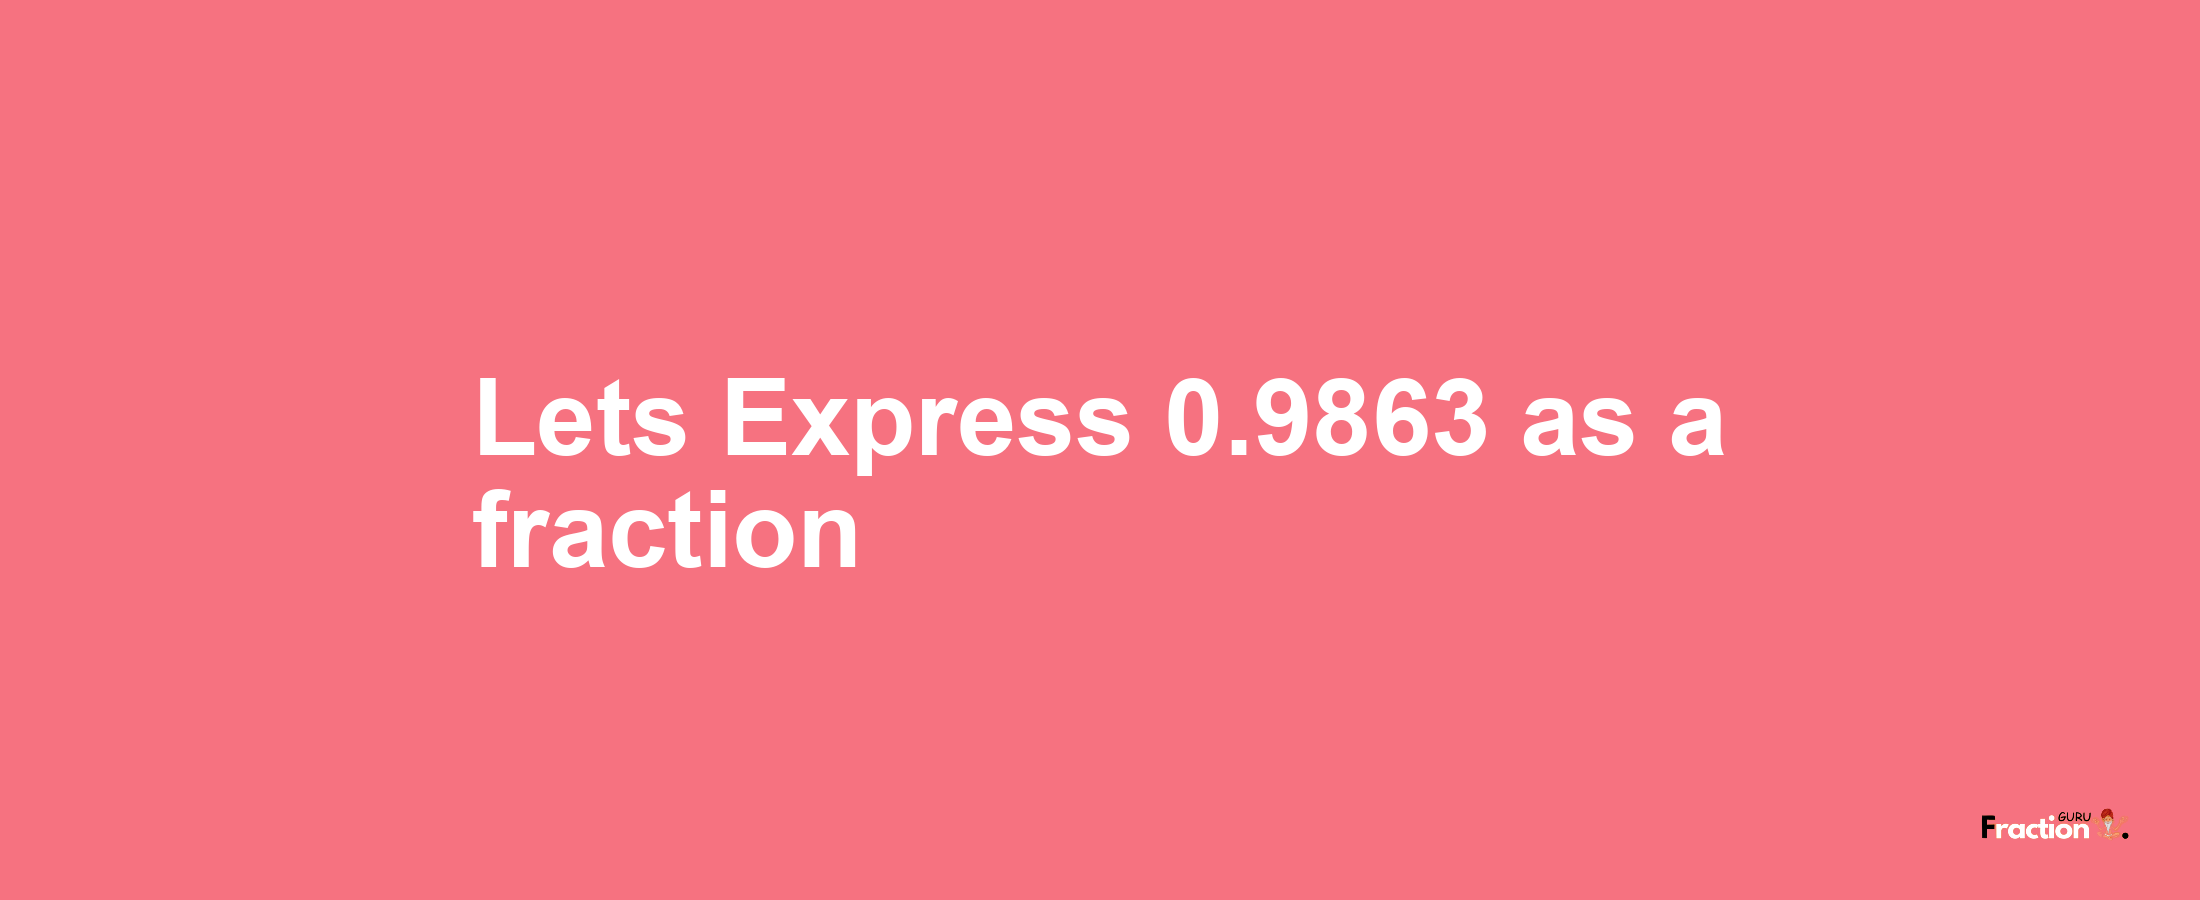 Lets Express 0.9863 as afraction